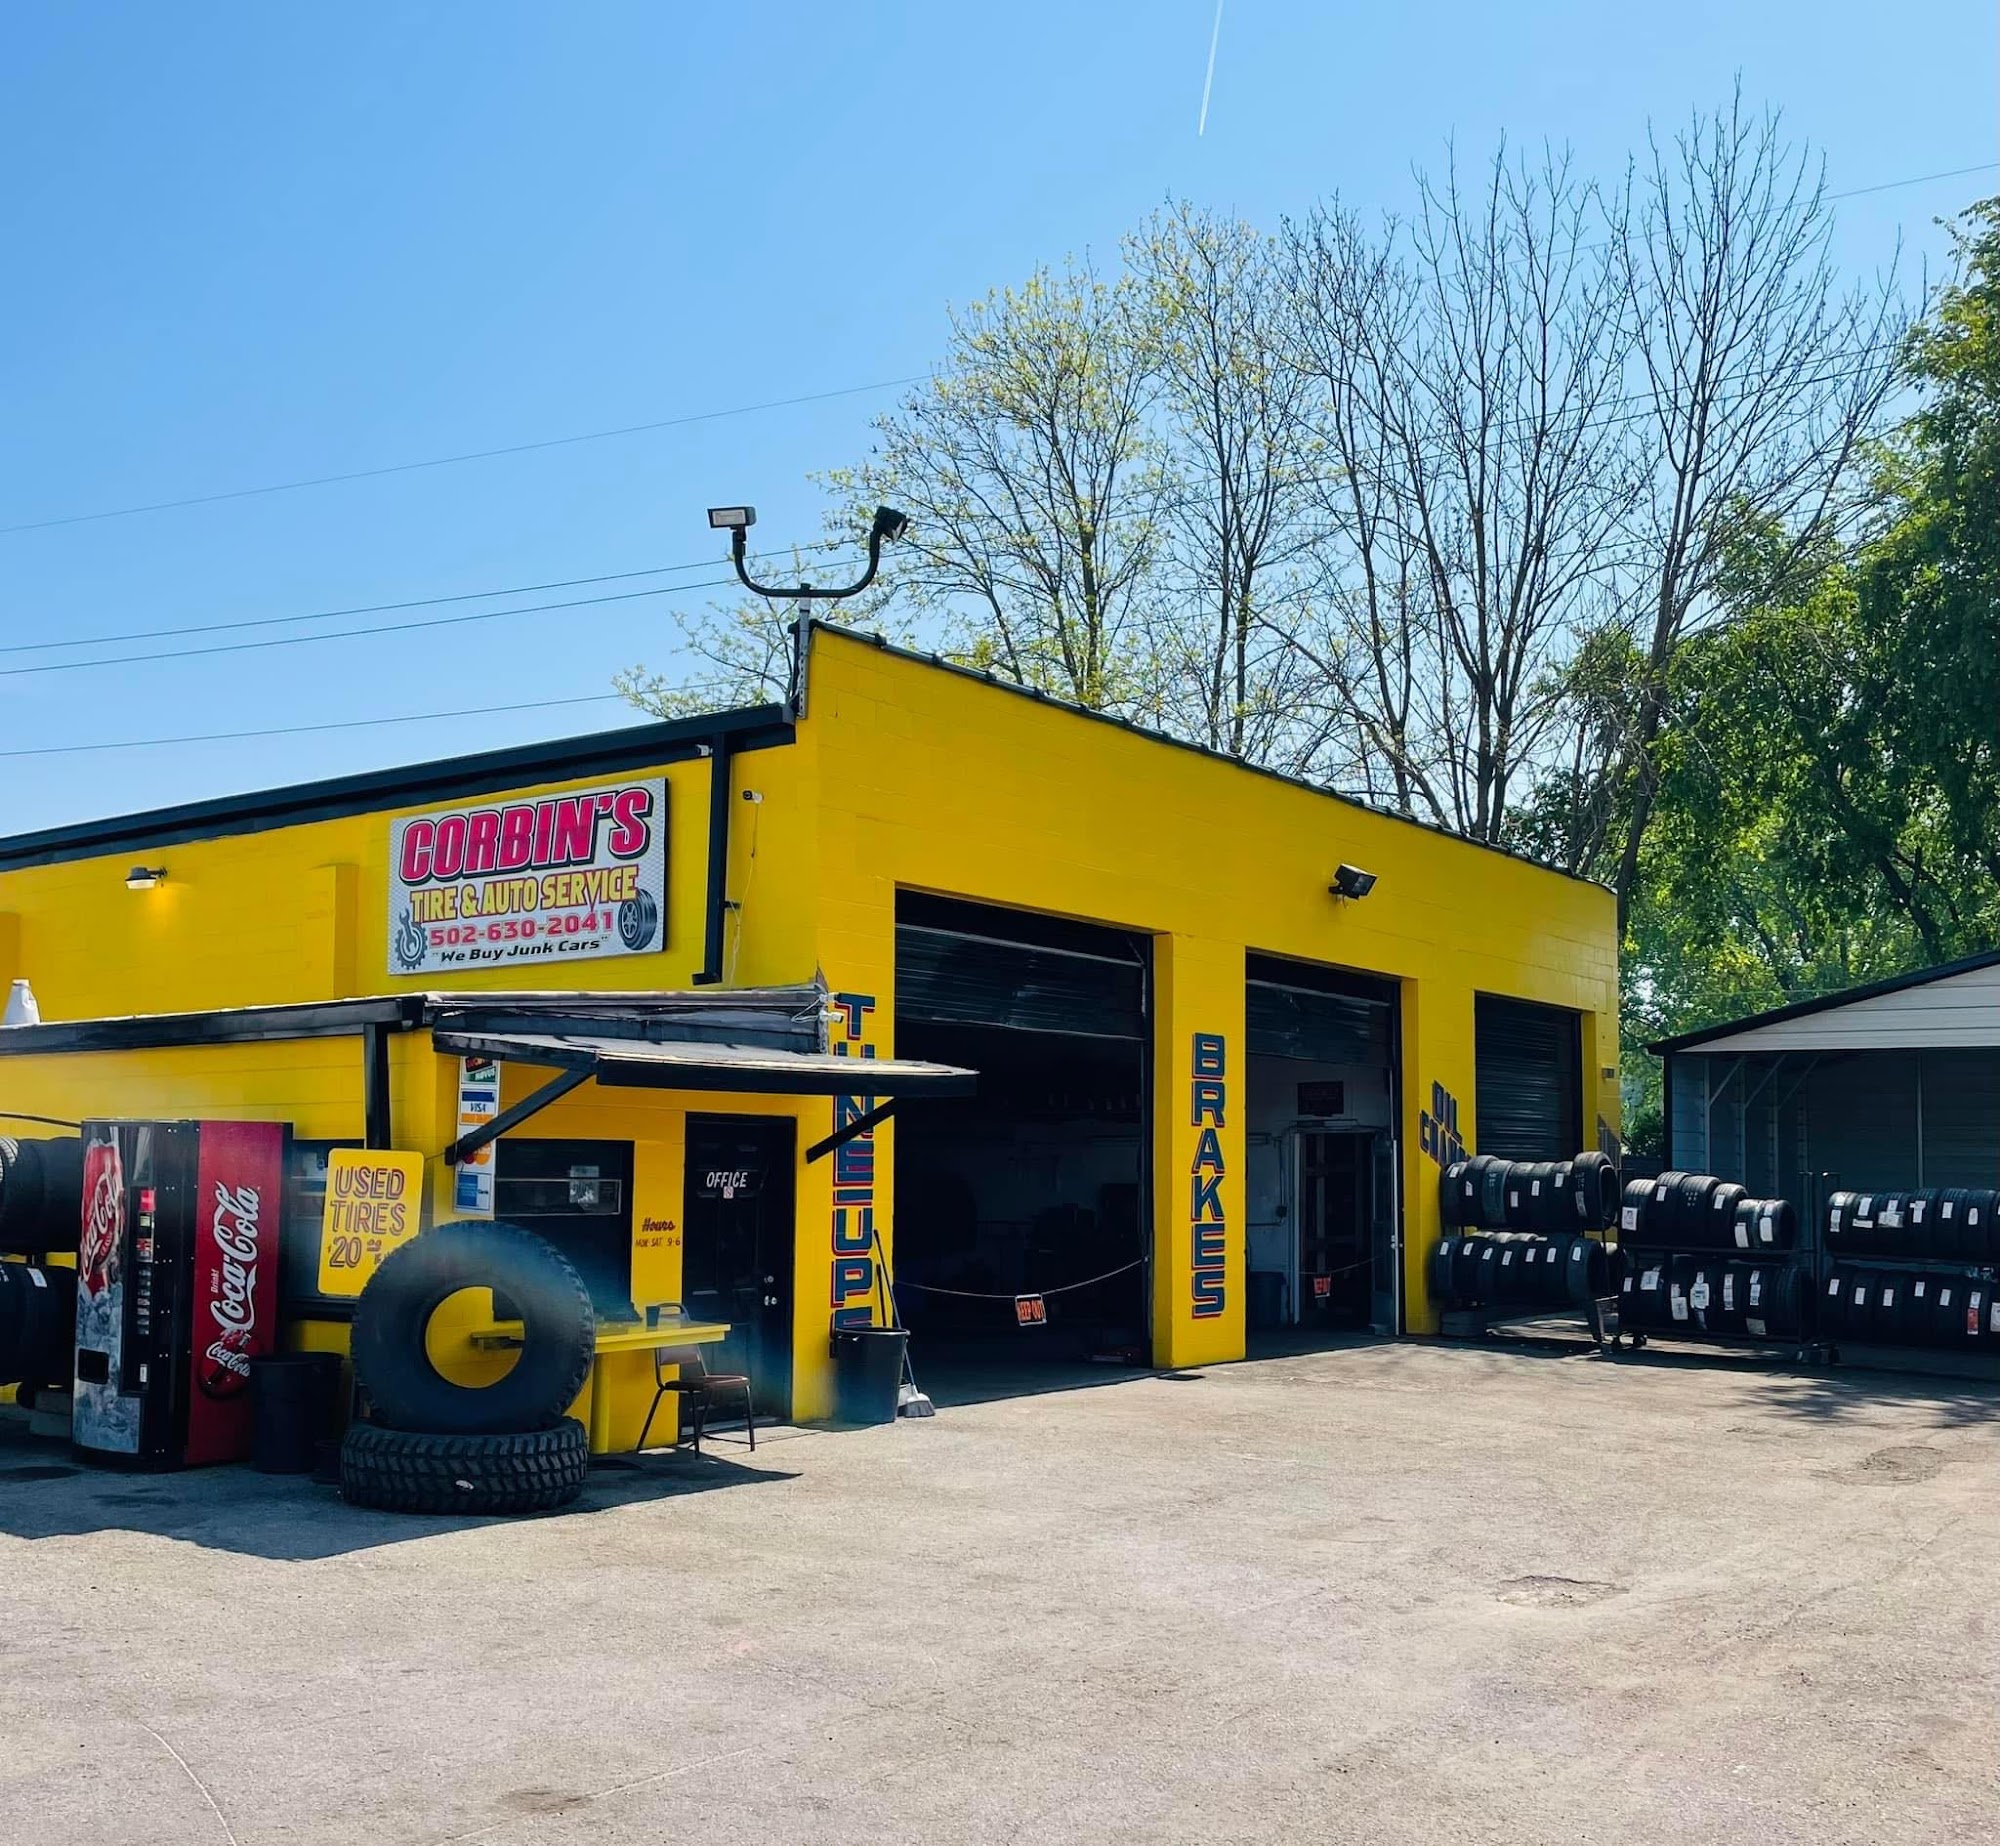 Corbin’s Towing and Tire Service